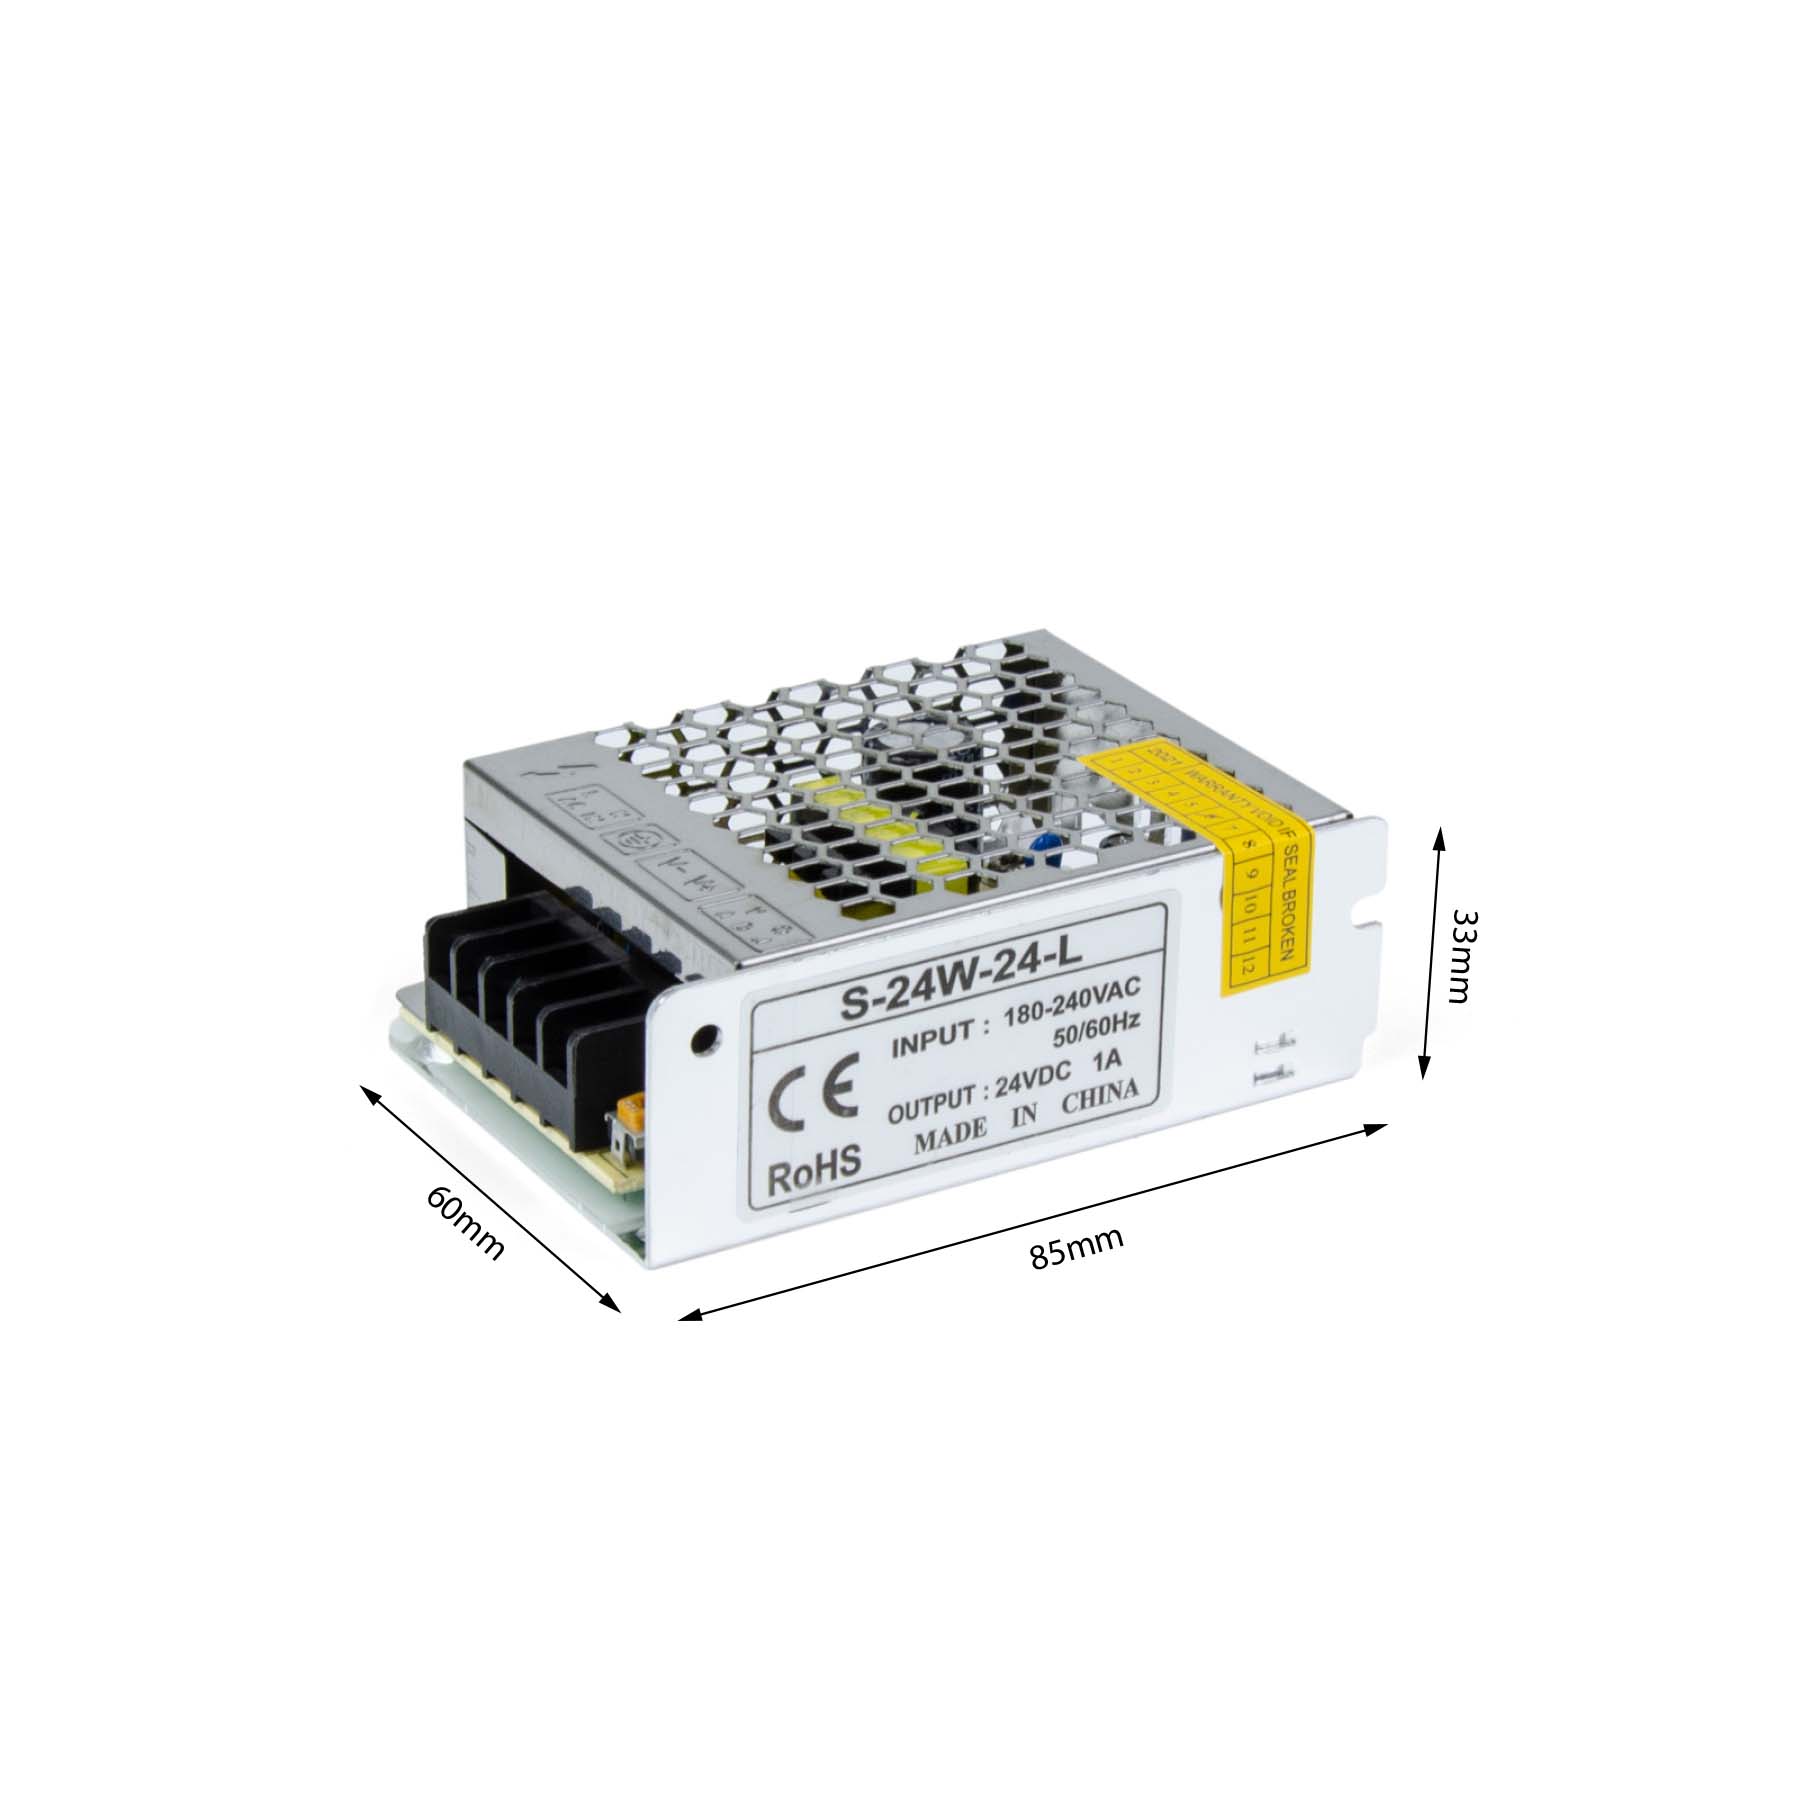 G.W.S LED Wholesale LED Drivers/LED Power Supplies IP20 (Non-Waterproof) / 24V / 24W 24V 1A 24W LED Driver